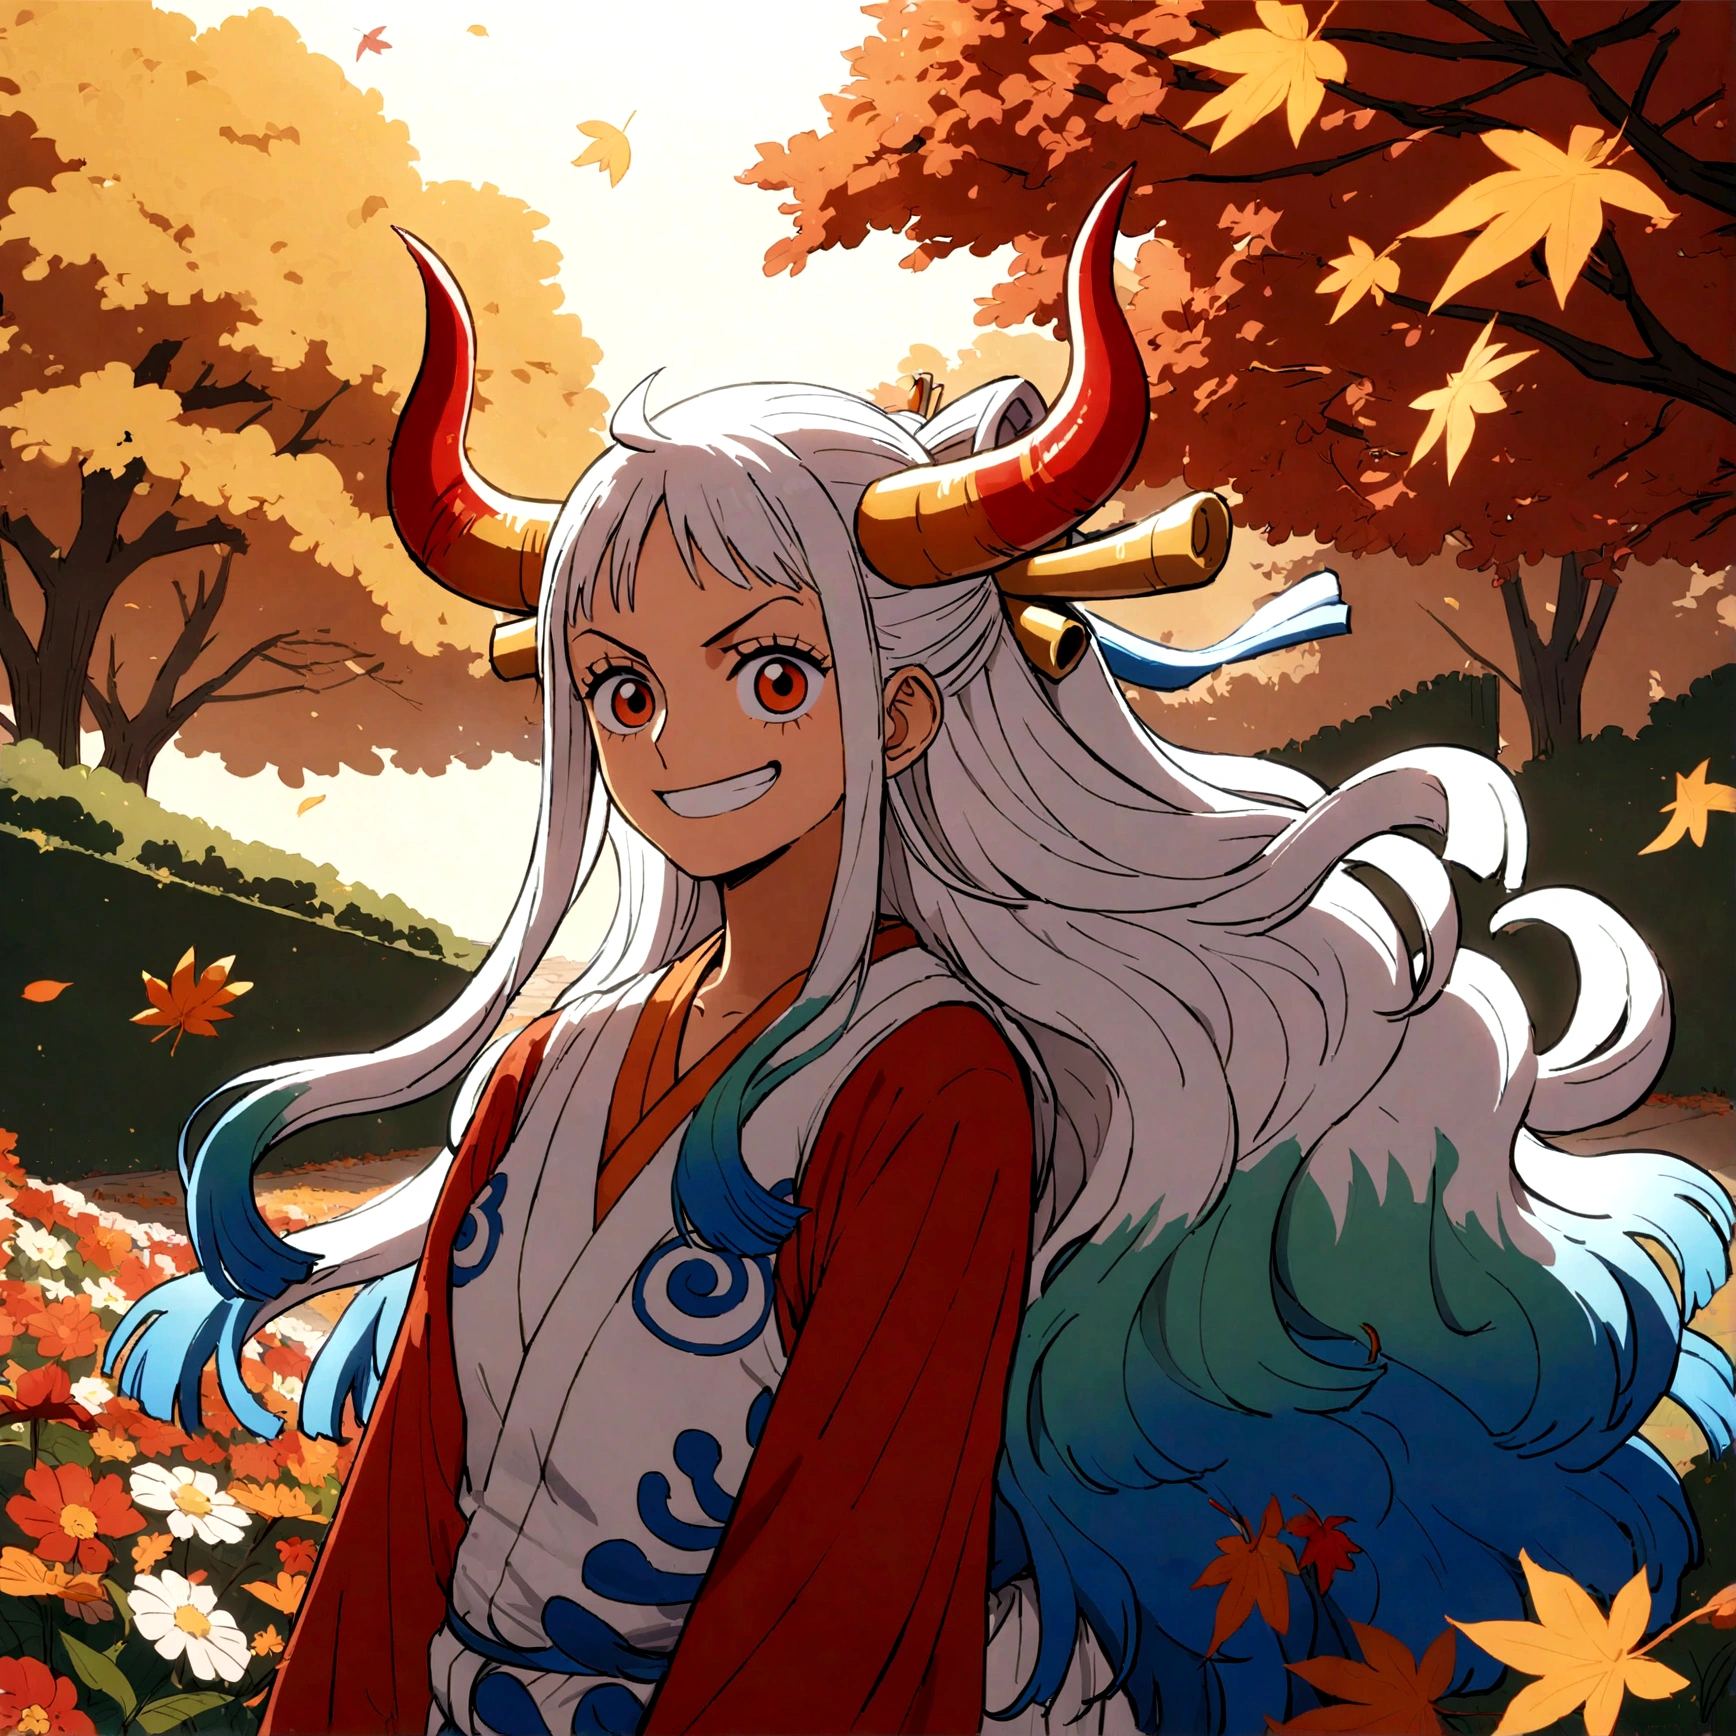 (yamato of one piece),smile,spotlight on face,long windy hair,multicolored hair,oni,horn,by eiichiro oda,solo,anime,flower,autumn leaves,garden,happy,masterpiece